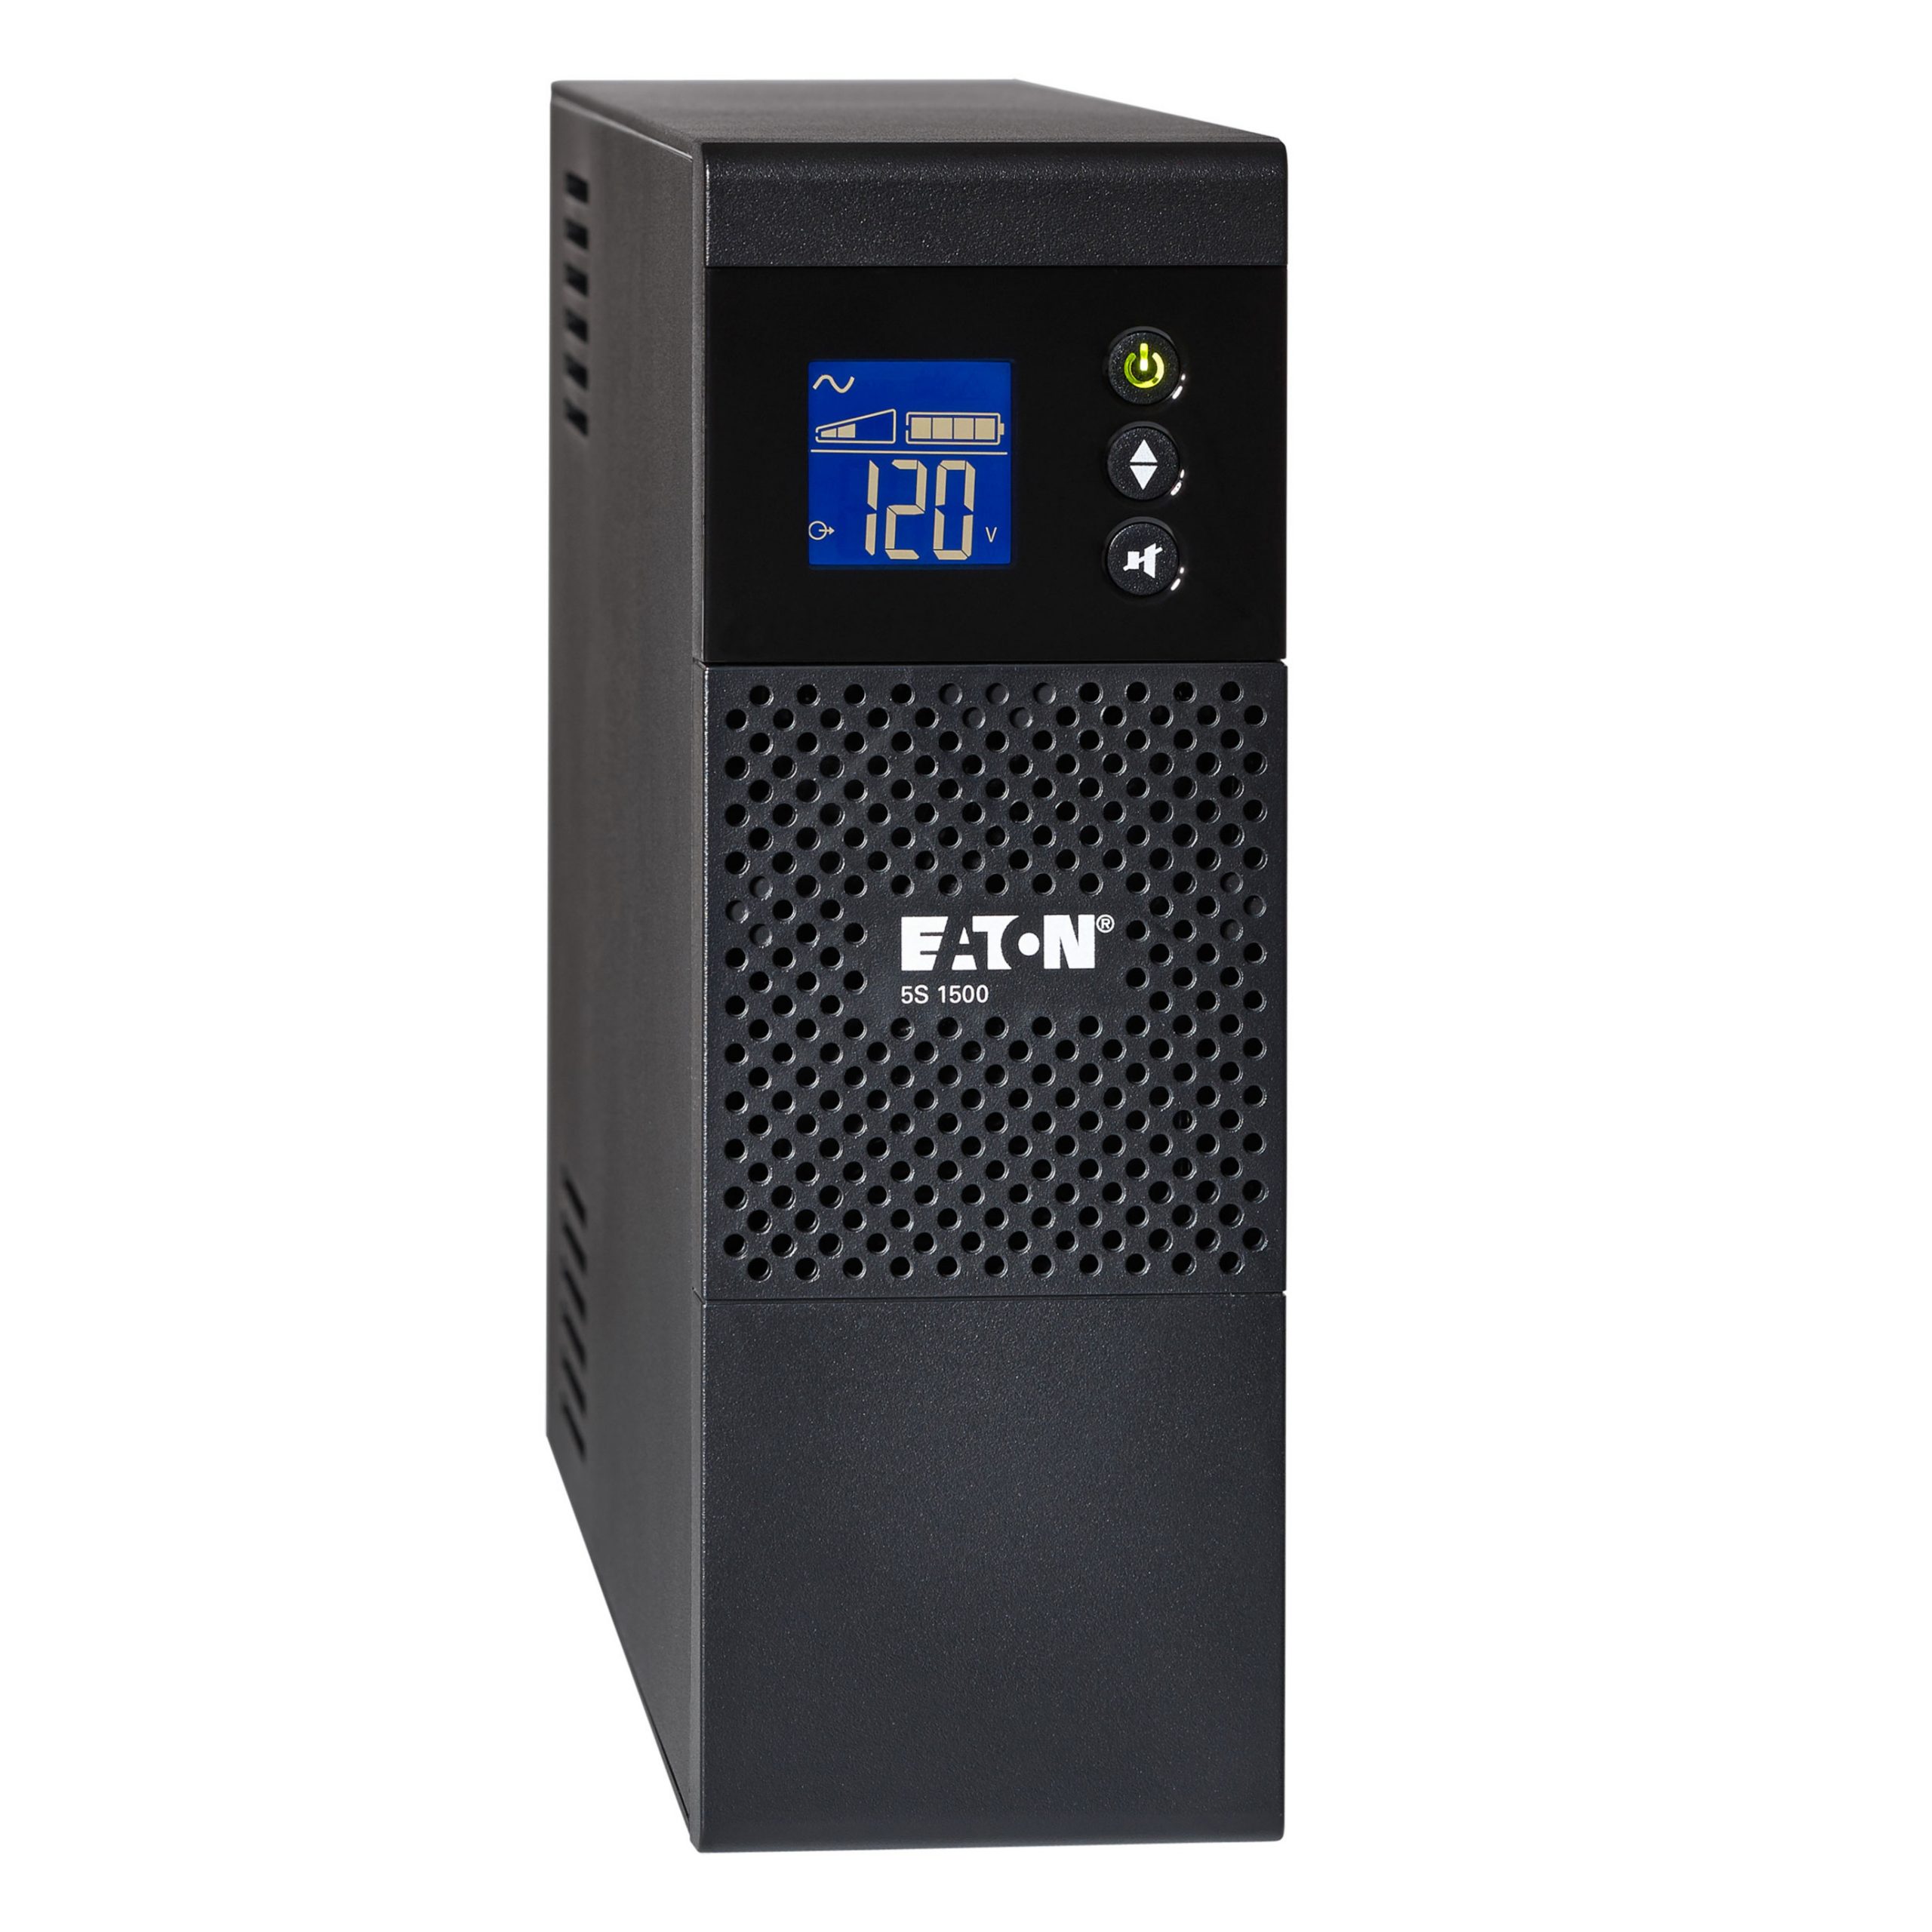 Eaton 5S UPS 1000VA 600 Watt 120V LCD Line-Interactive Battery Backup ECO USBTower3 Minute Stand-by110 V AC Input115 V AC Output -… 5S1000LCD